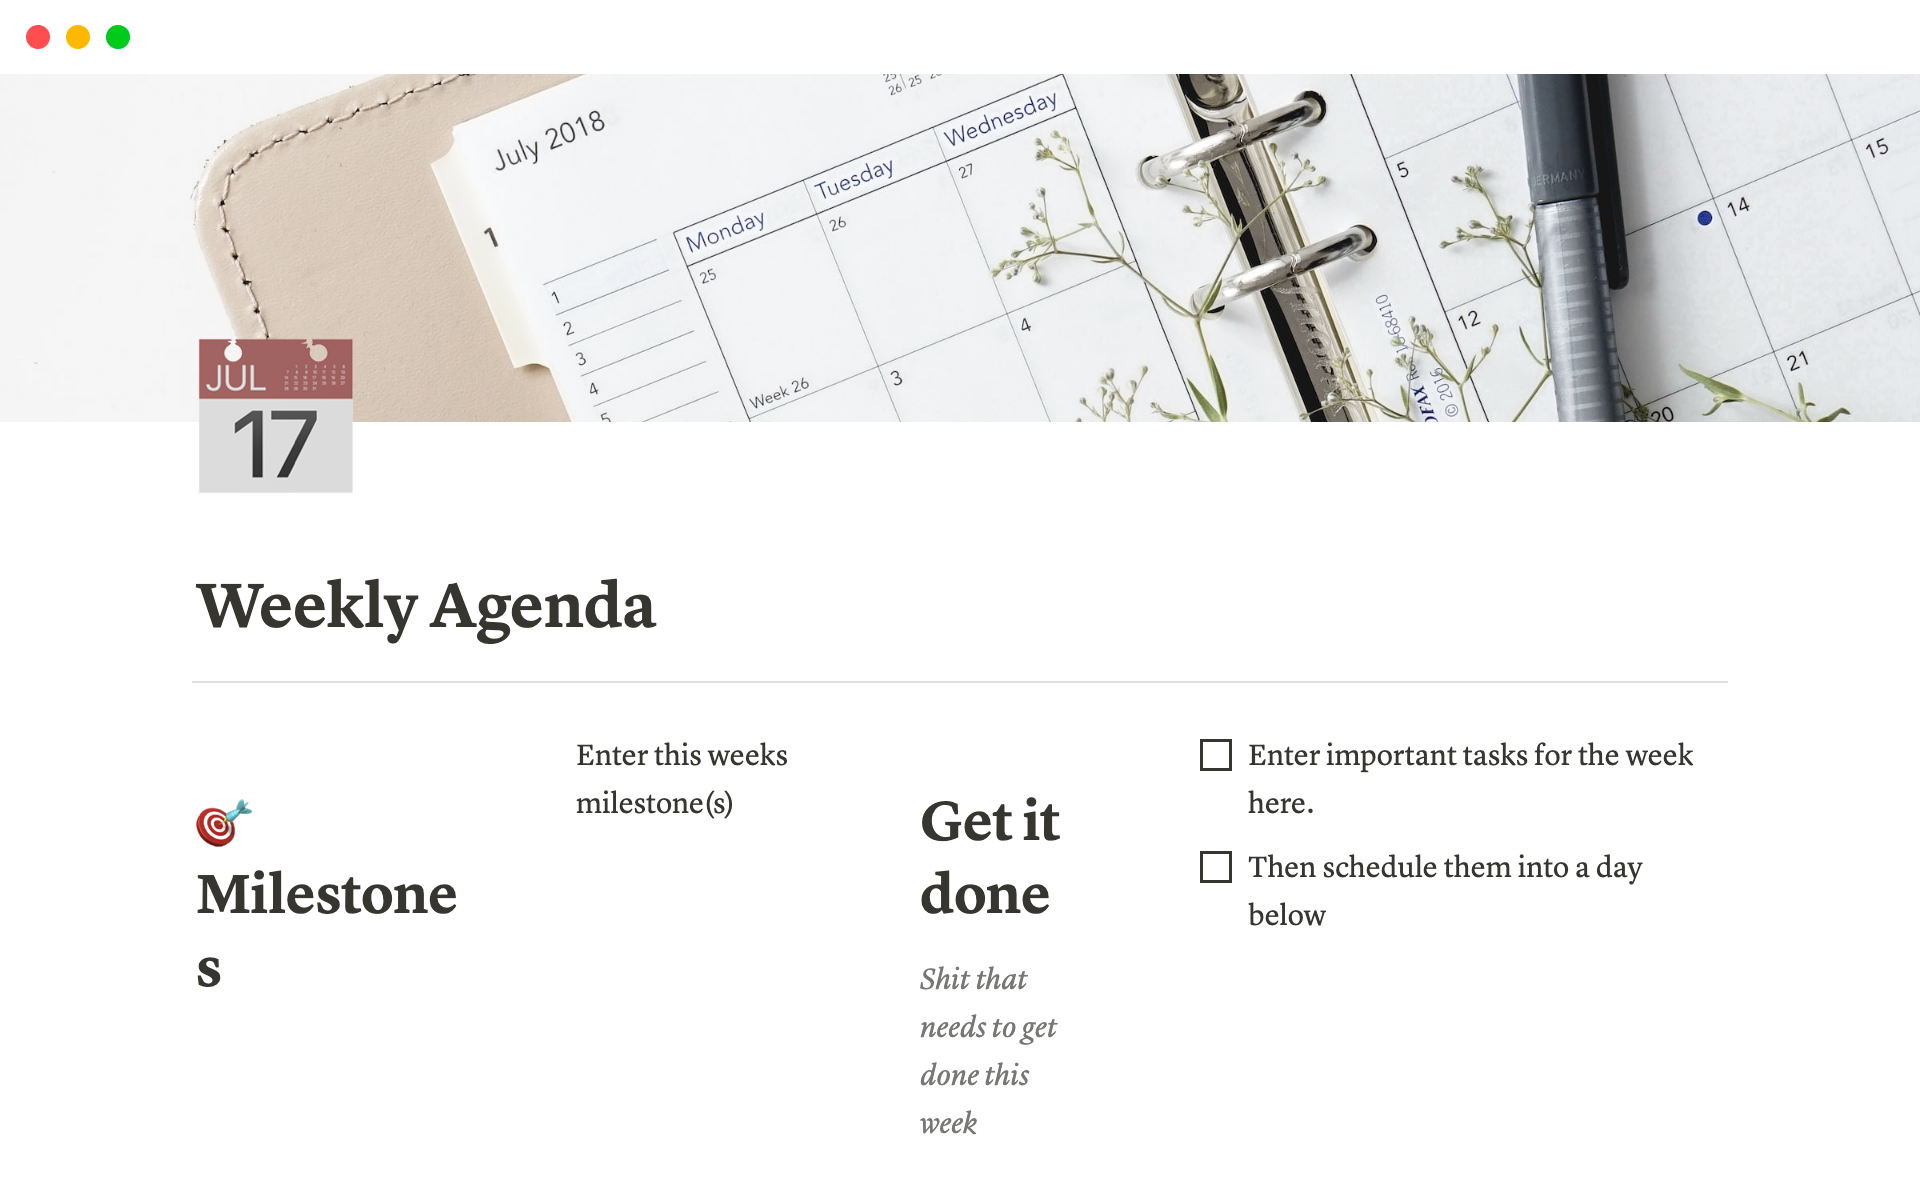 Our Weekly Agenda Notion Template can help you take control of your schedule and stay on top of your to-do list.